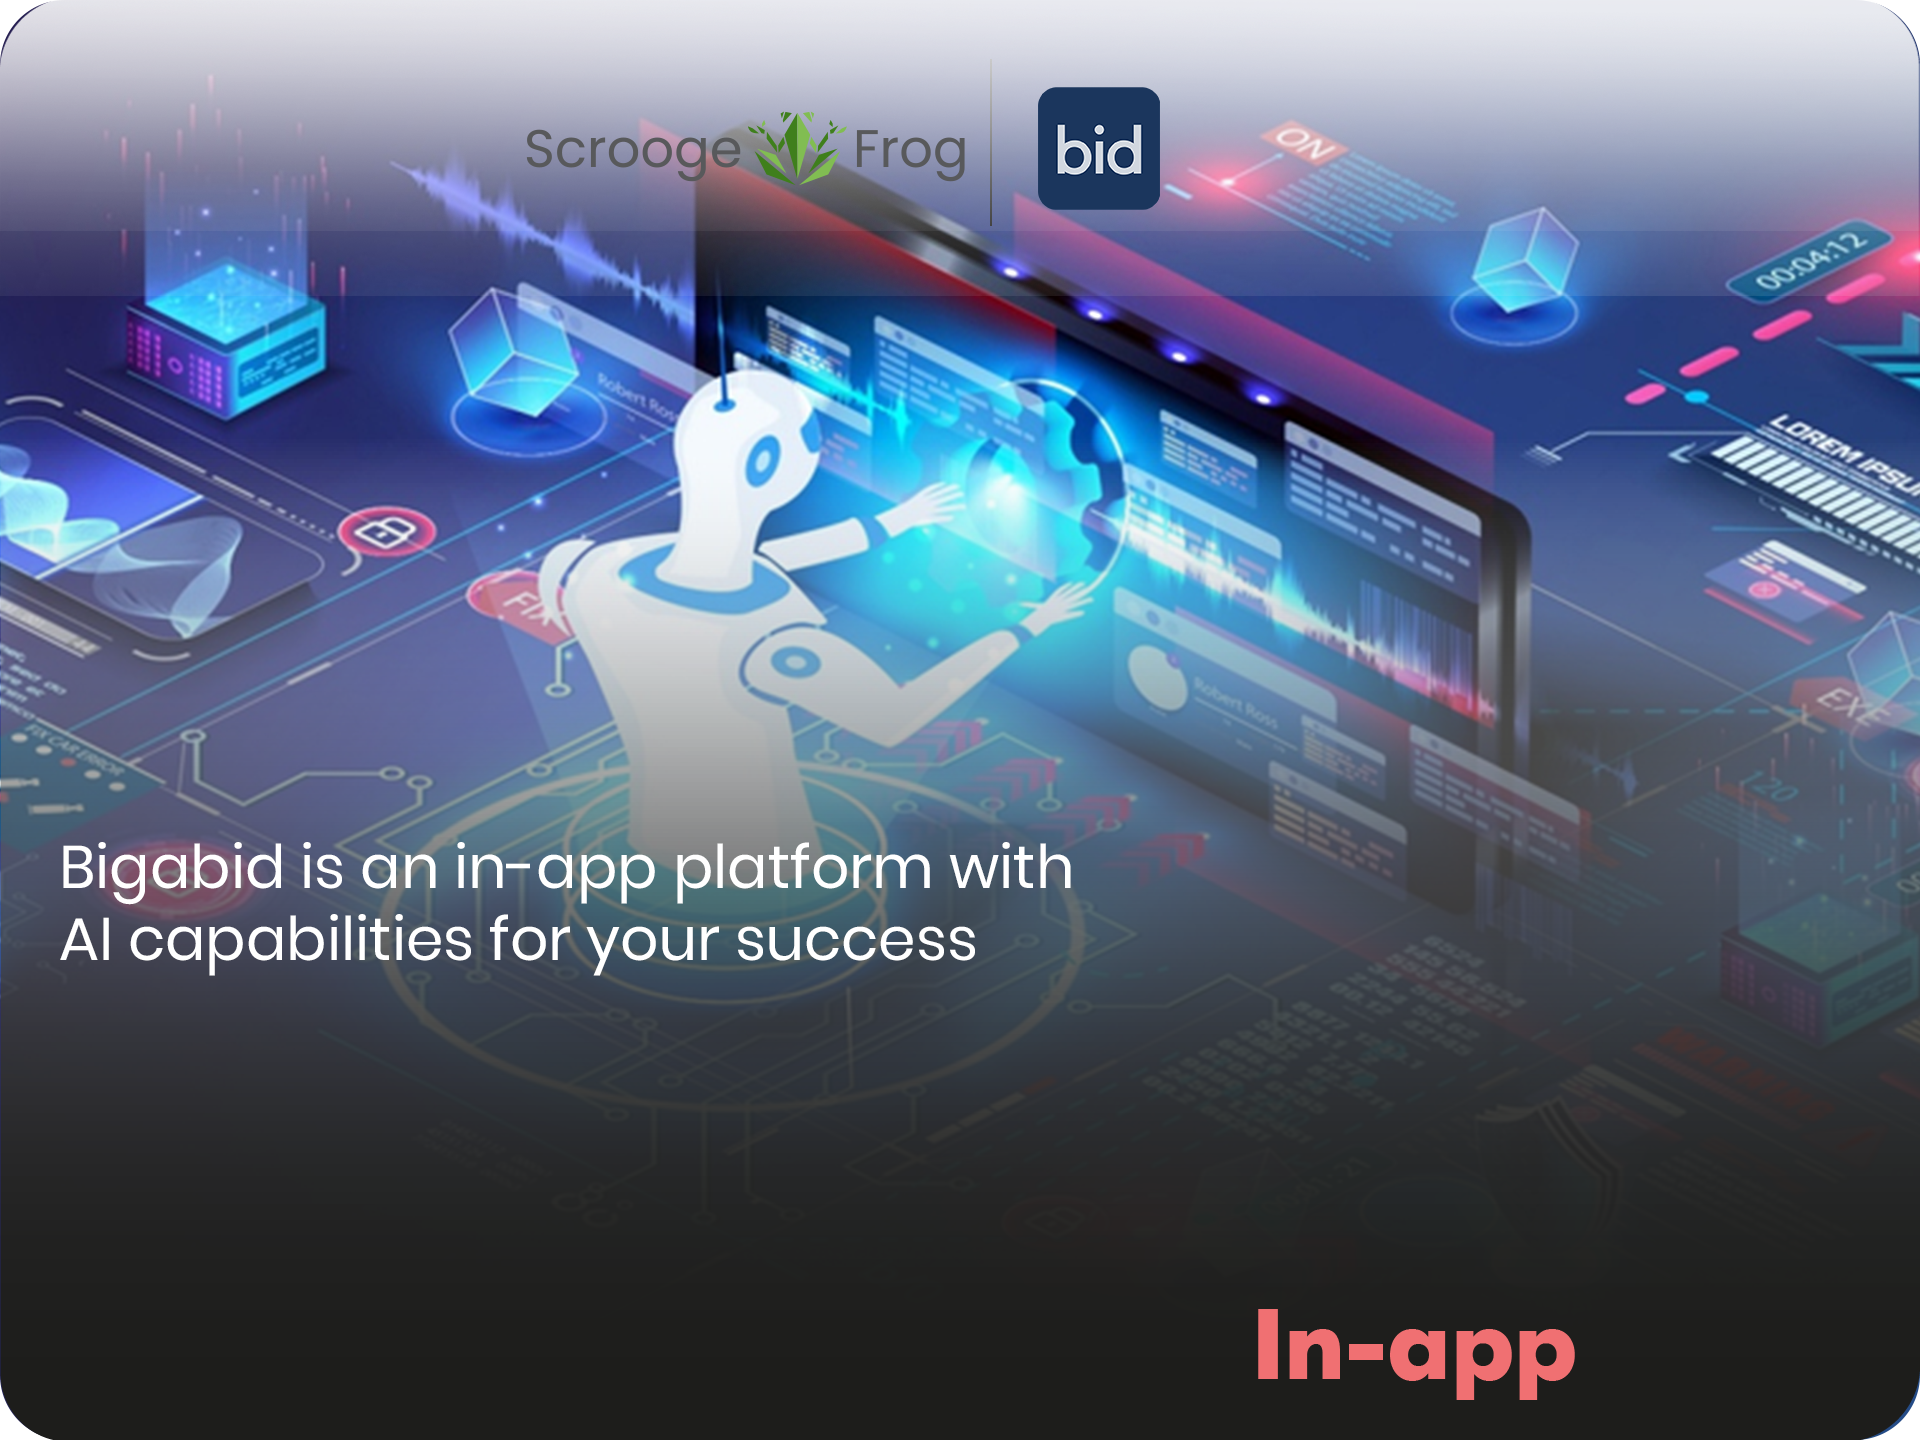 Bigabid is an in-app platform with AI capabilities for your success